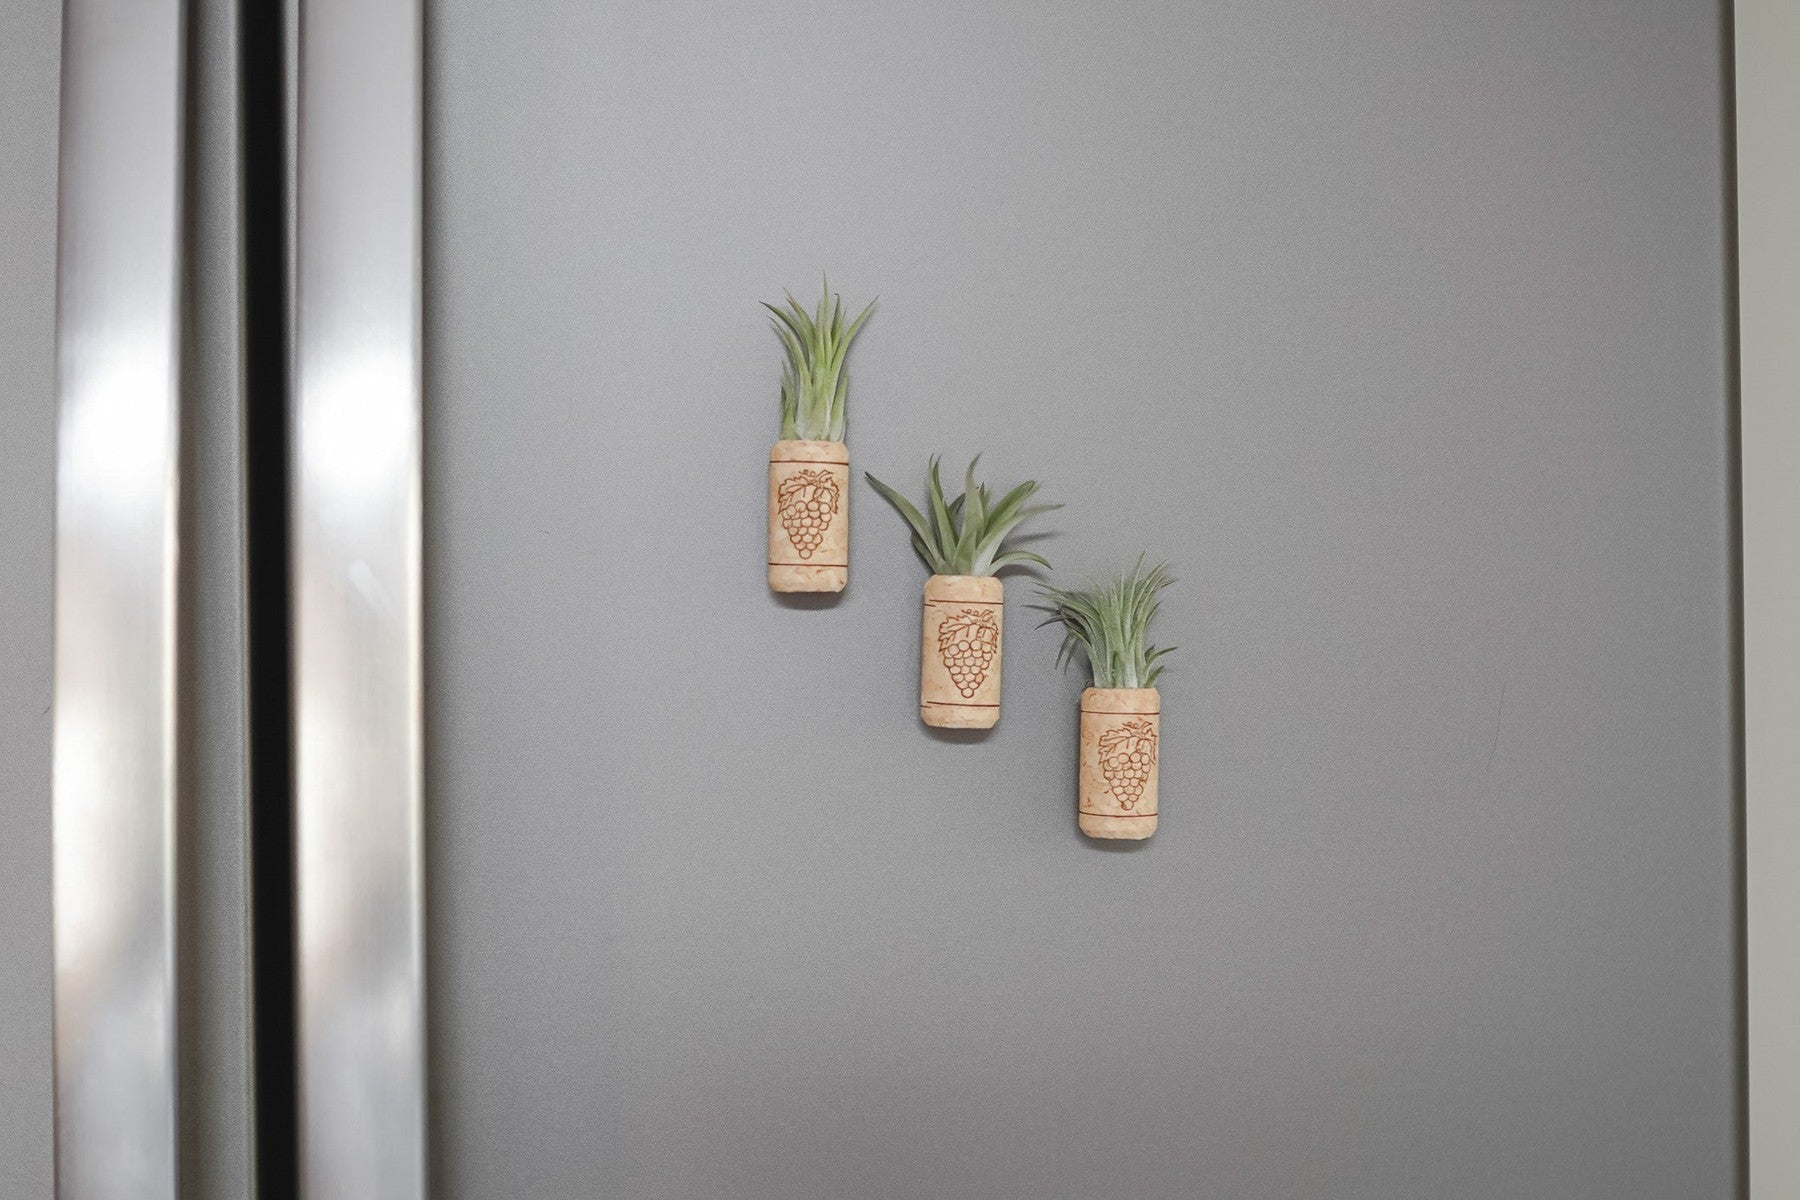 Magnetic Wine Corks with Assorted Tillandsia Air Plants - Set of 3, 6 or 9-terrarium-The Succulent Source